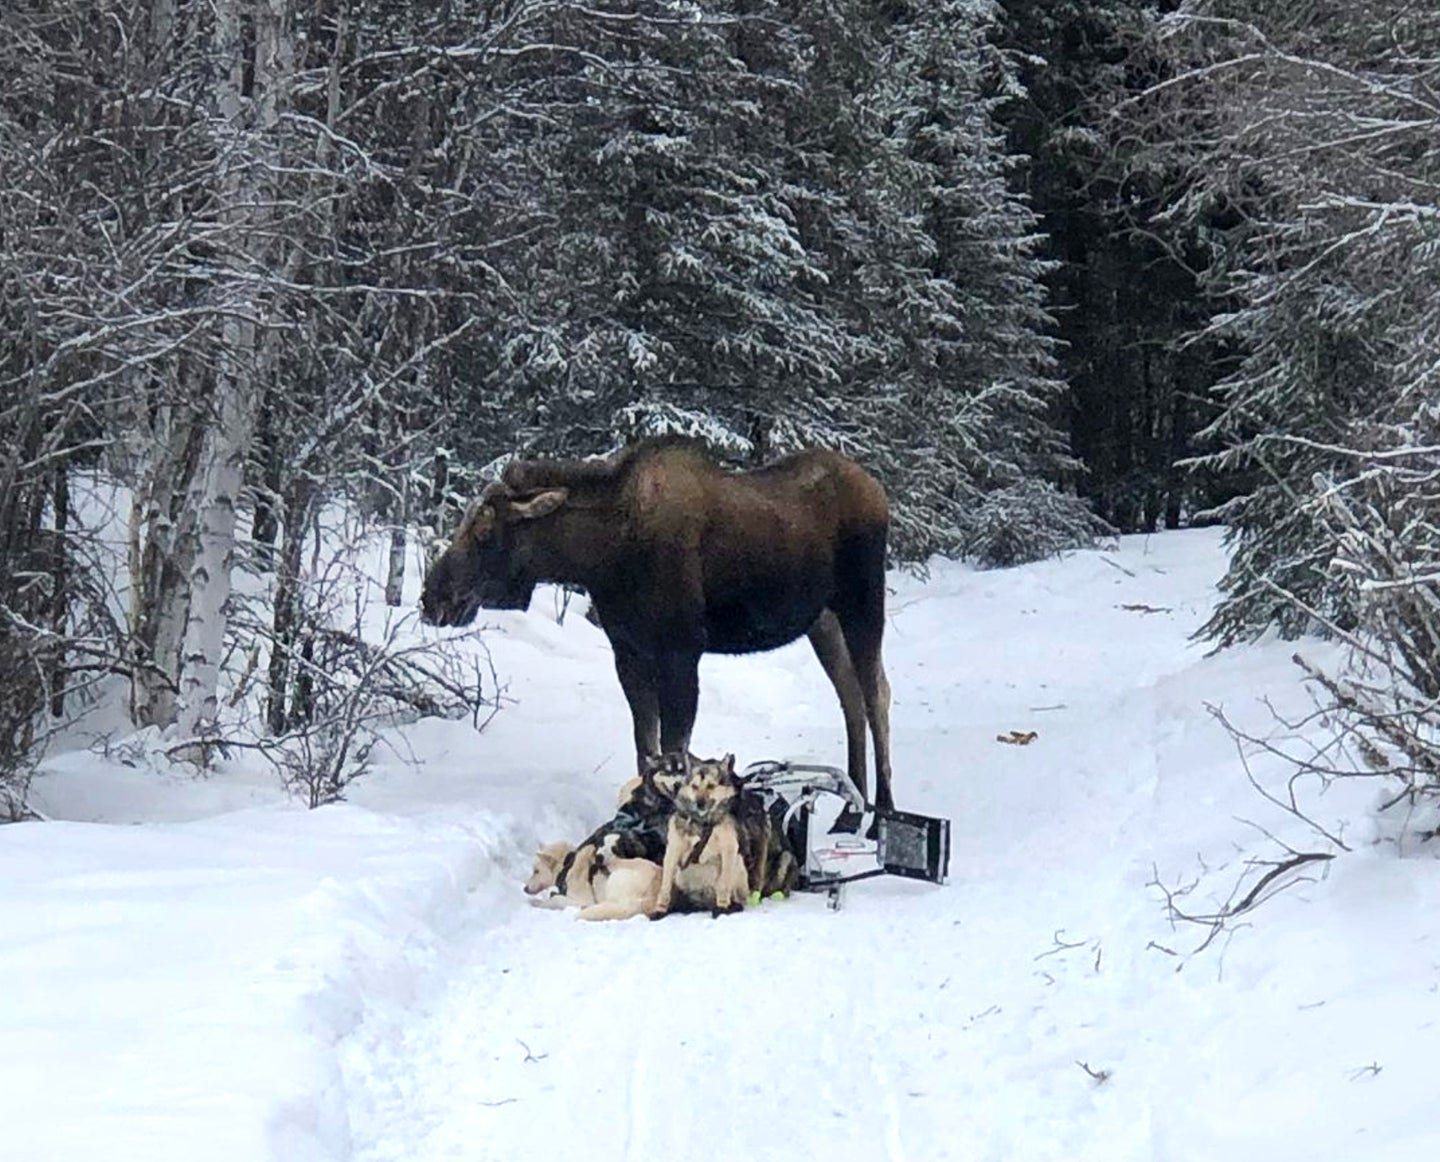 “He Was Charging Full Speed Right at Me.” The Alaskan Musher Attacked by a Moose Shares Her Story